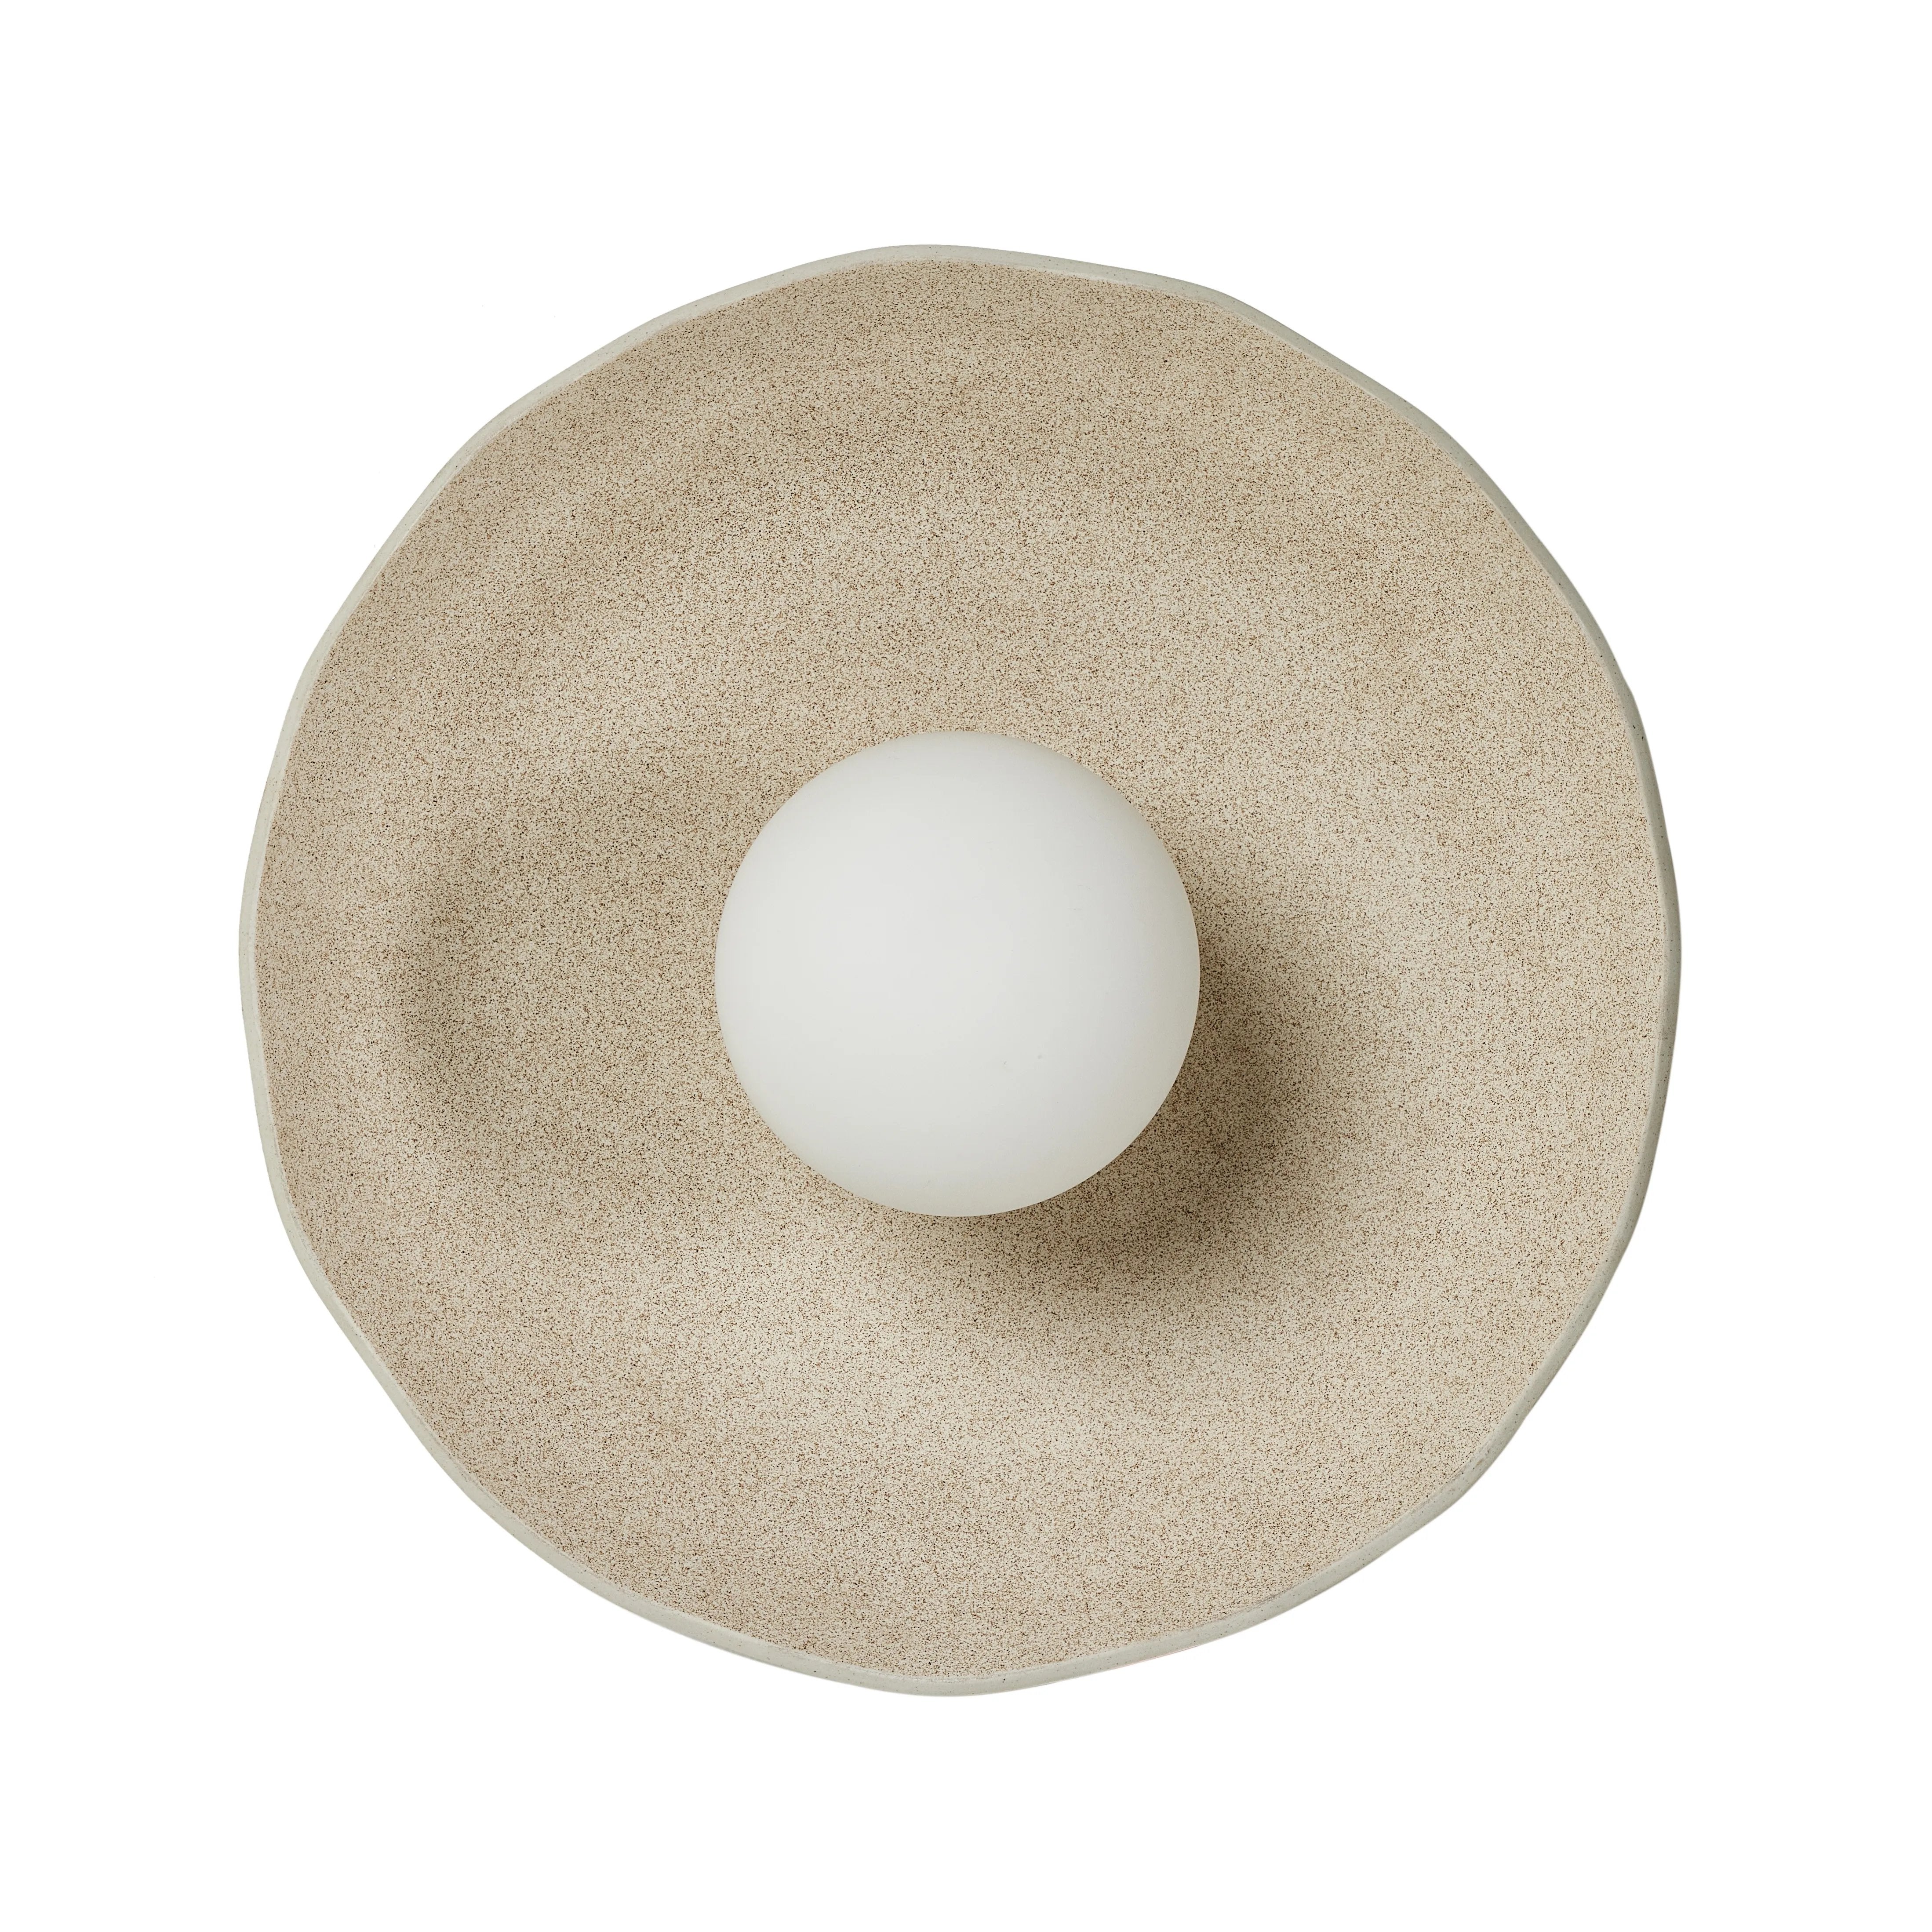 Organic in spirit. A light sand-colored porcelain disc is nestled in a slim iron frame for a spare but impactful look.Collection: Ryke Amethyst Home provides interior design, new home construction design consulting, vintage area rugs, and lighting in the Charlotte metro area.